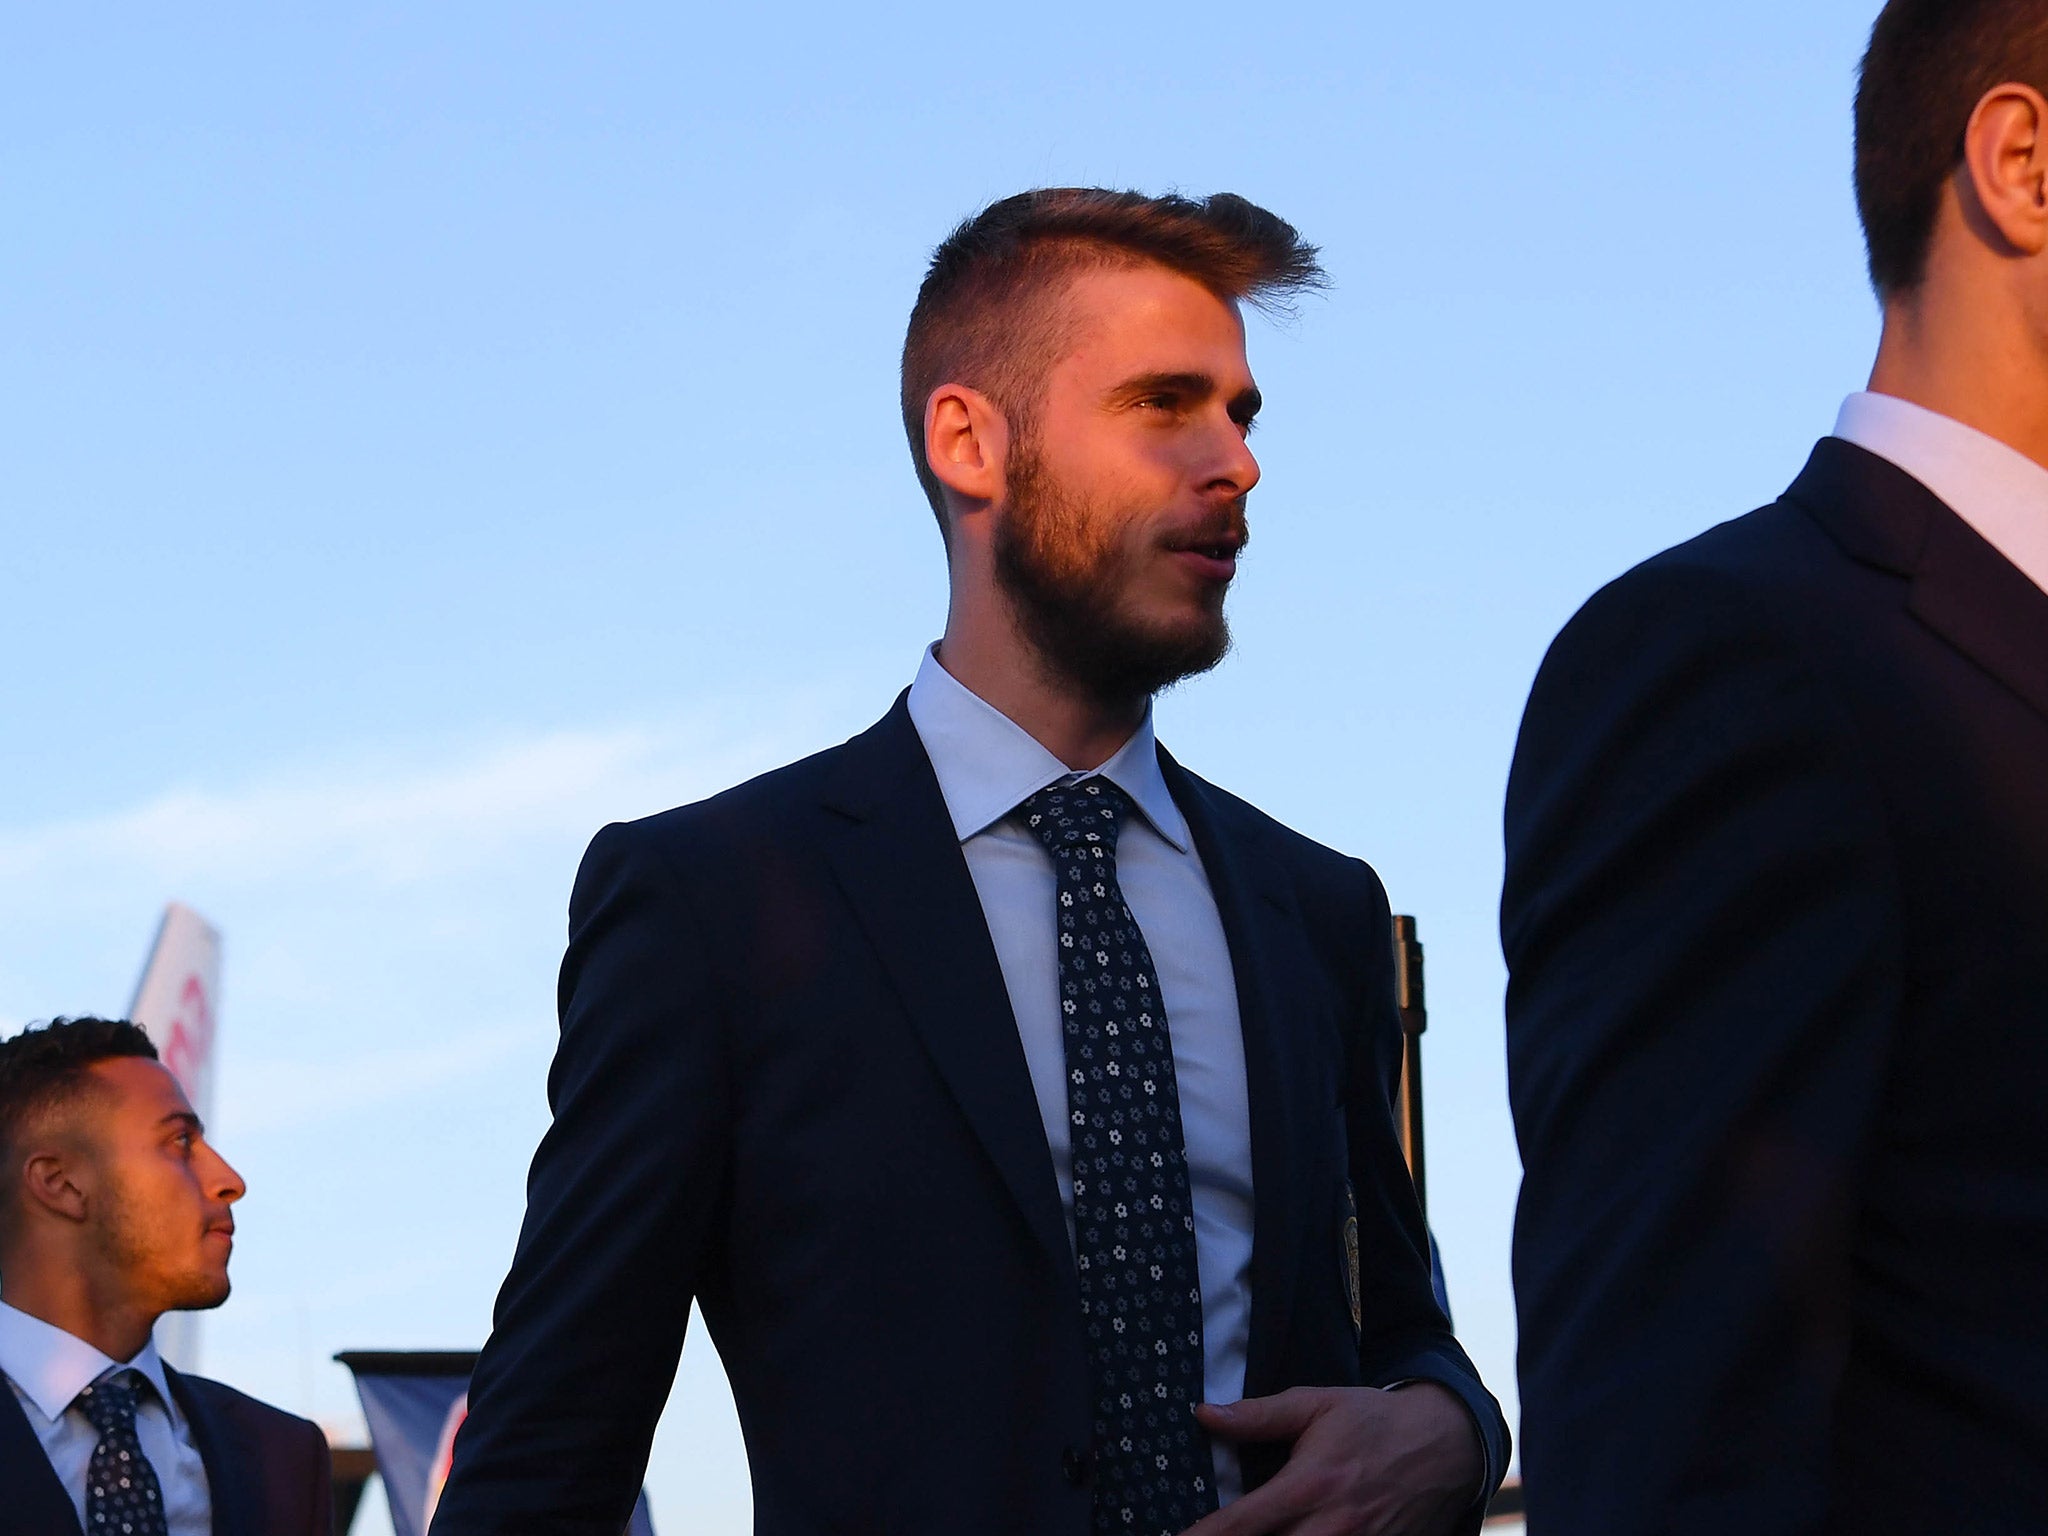 David De Gea has denied all allegations of wrongdoing in a Spanish court case